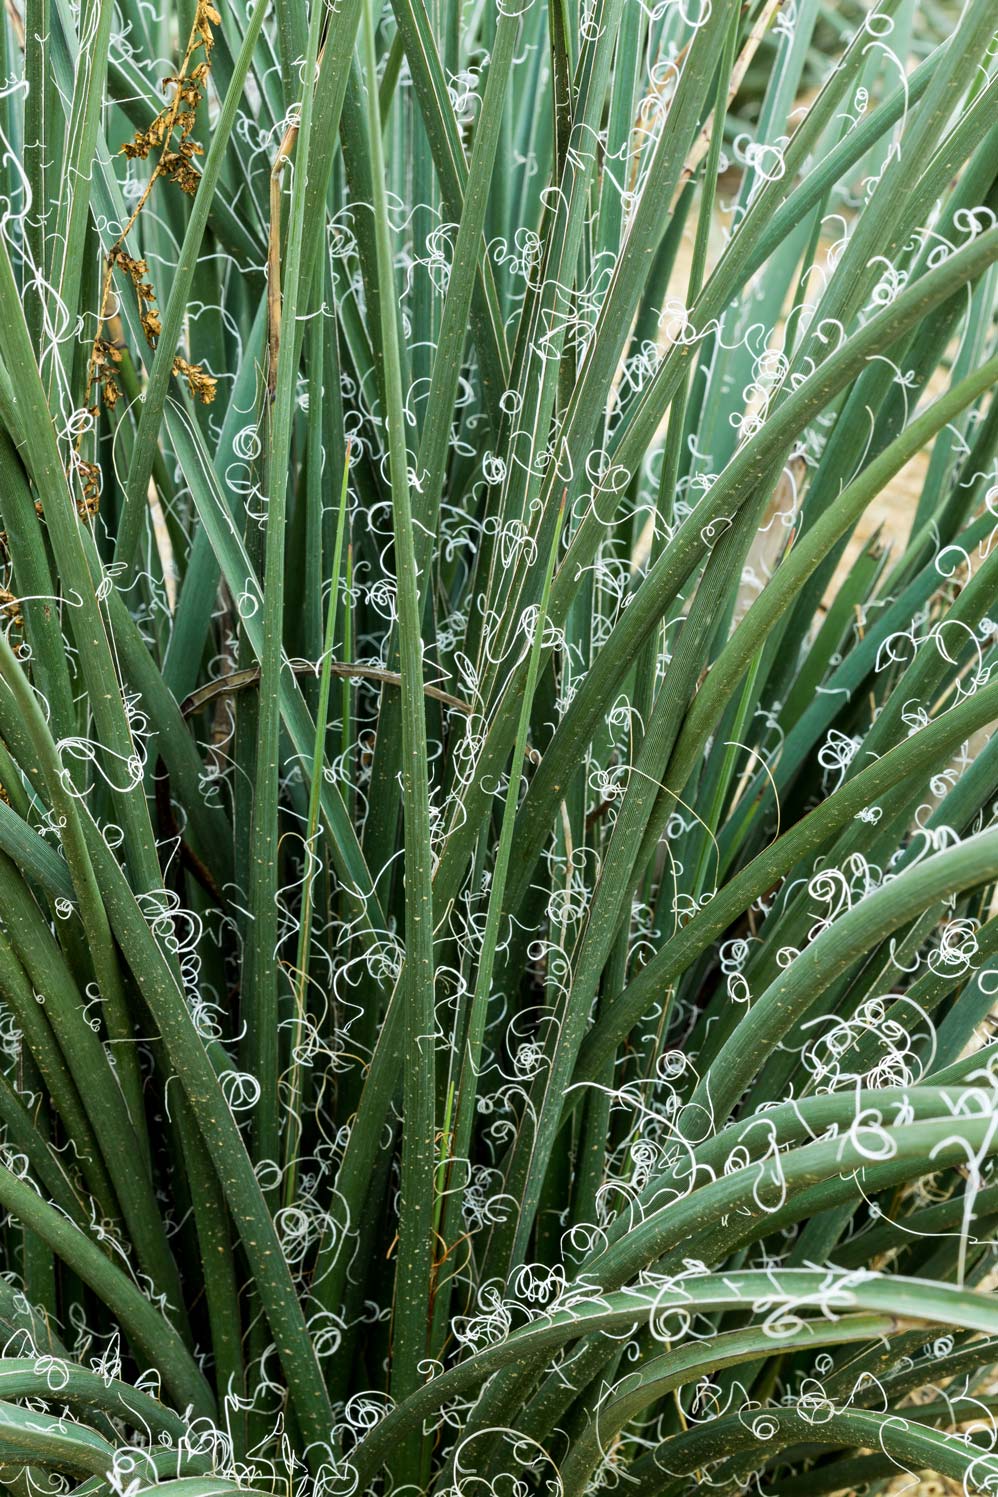 A close-up of the green leaves of Red Hesperaloe with their curly fibers.